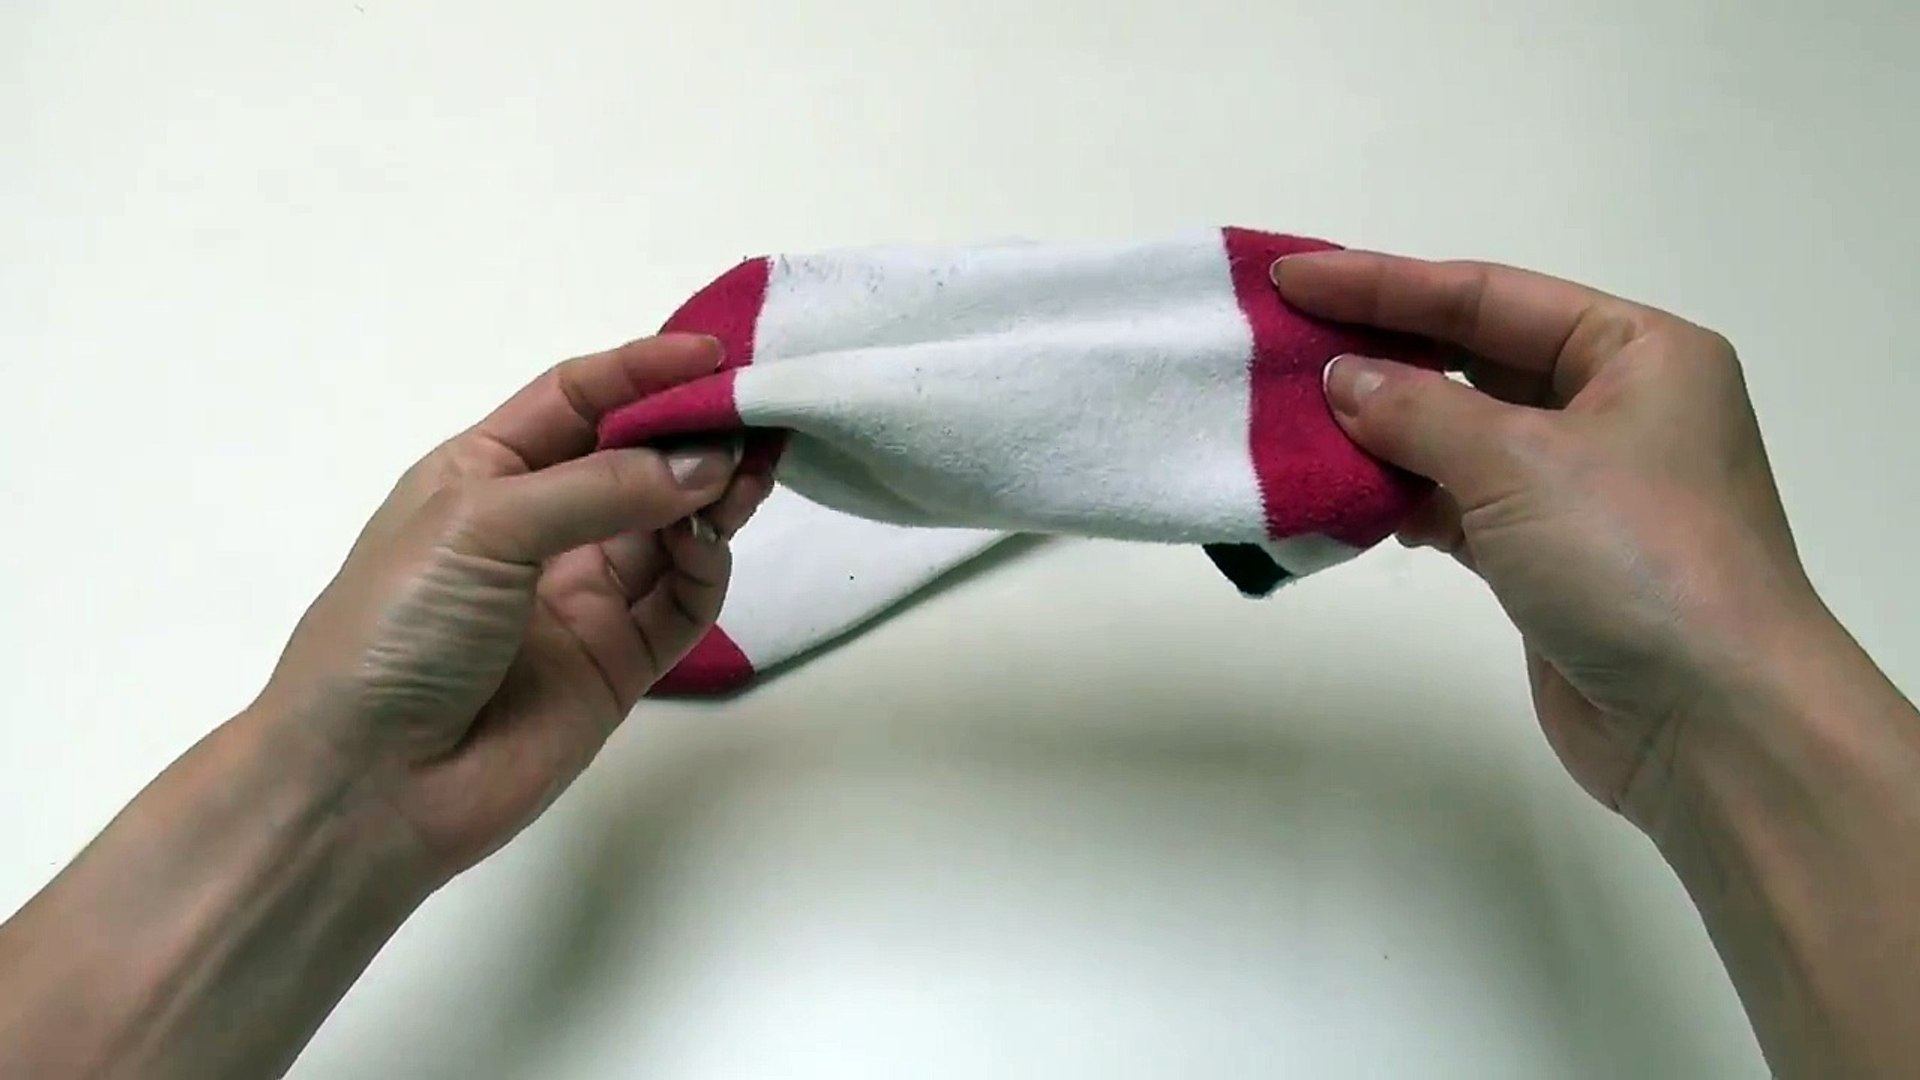 How to fold Socks - Comment Plier les petites Chaussettes (astuce) - video  Dailymotion